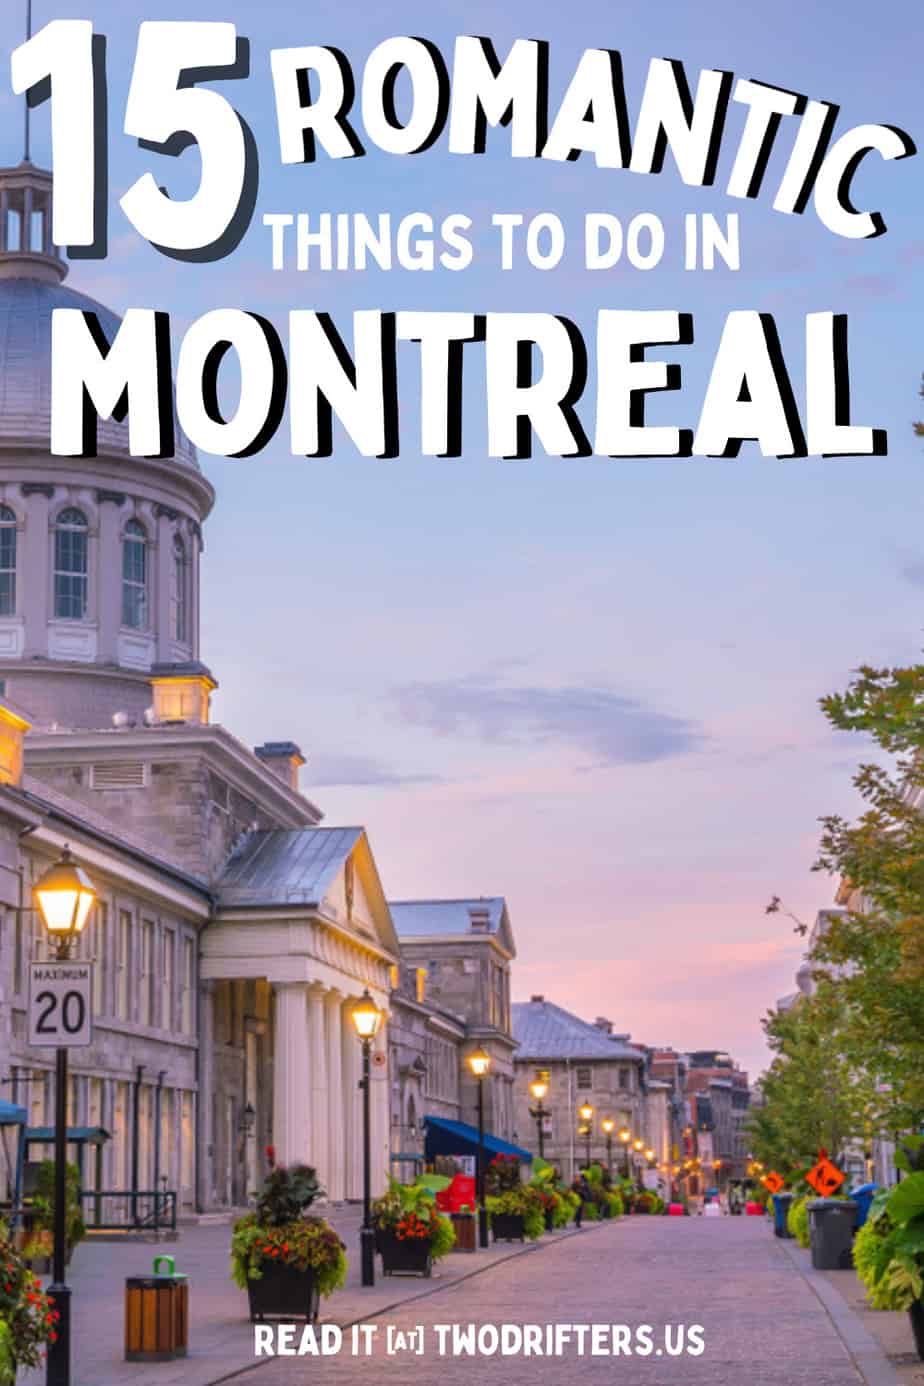 Pinterest social share image that says "15 Romantic Things to do in Montreal."